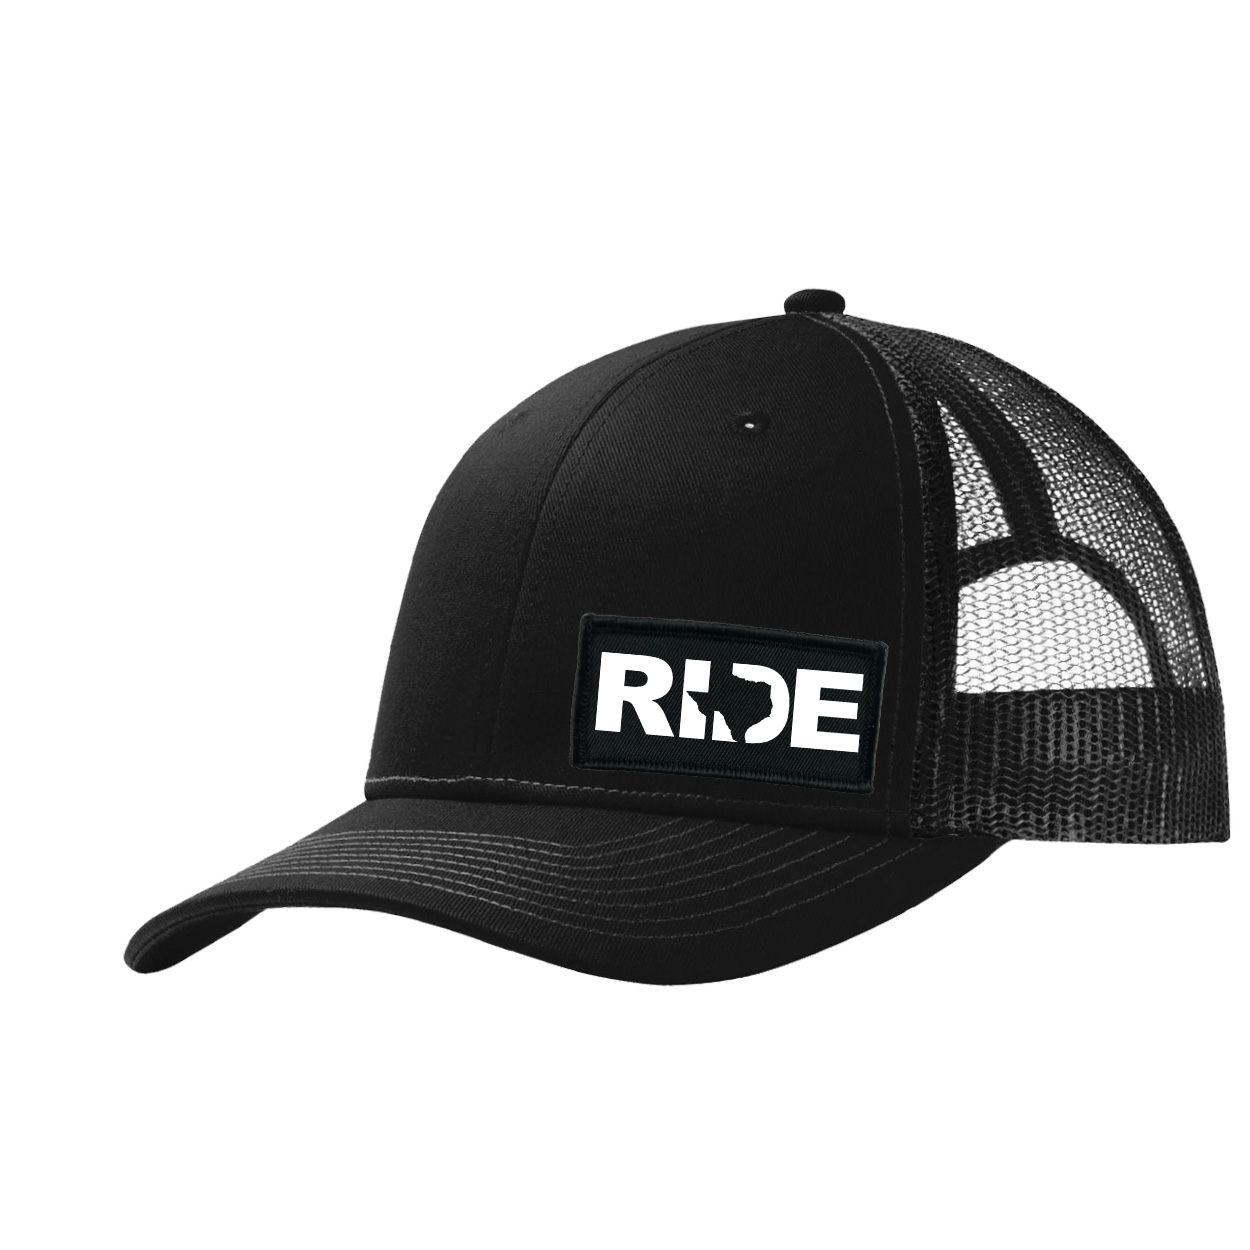 Ride Texas Night Out Woven Patch Snapback Trucker Hat Black (White Logo)